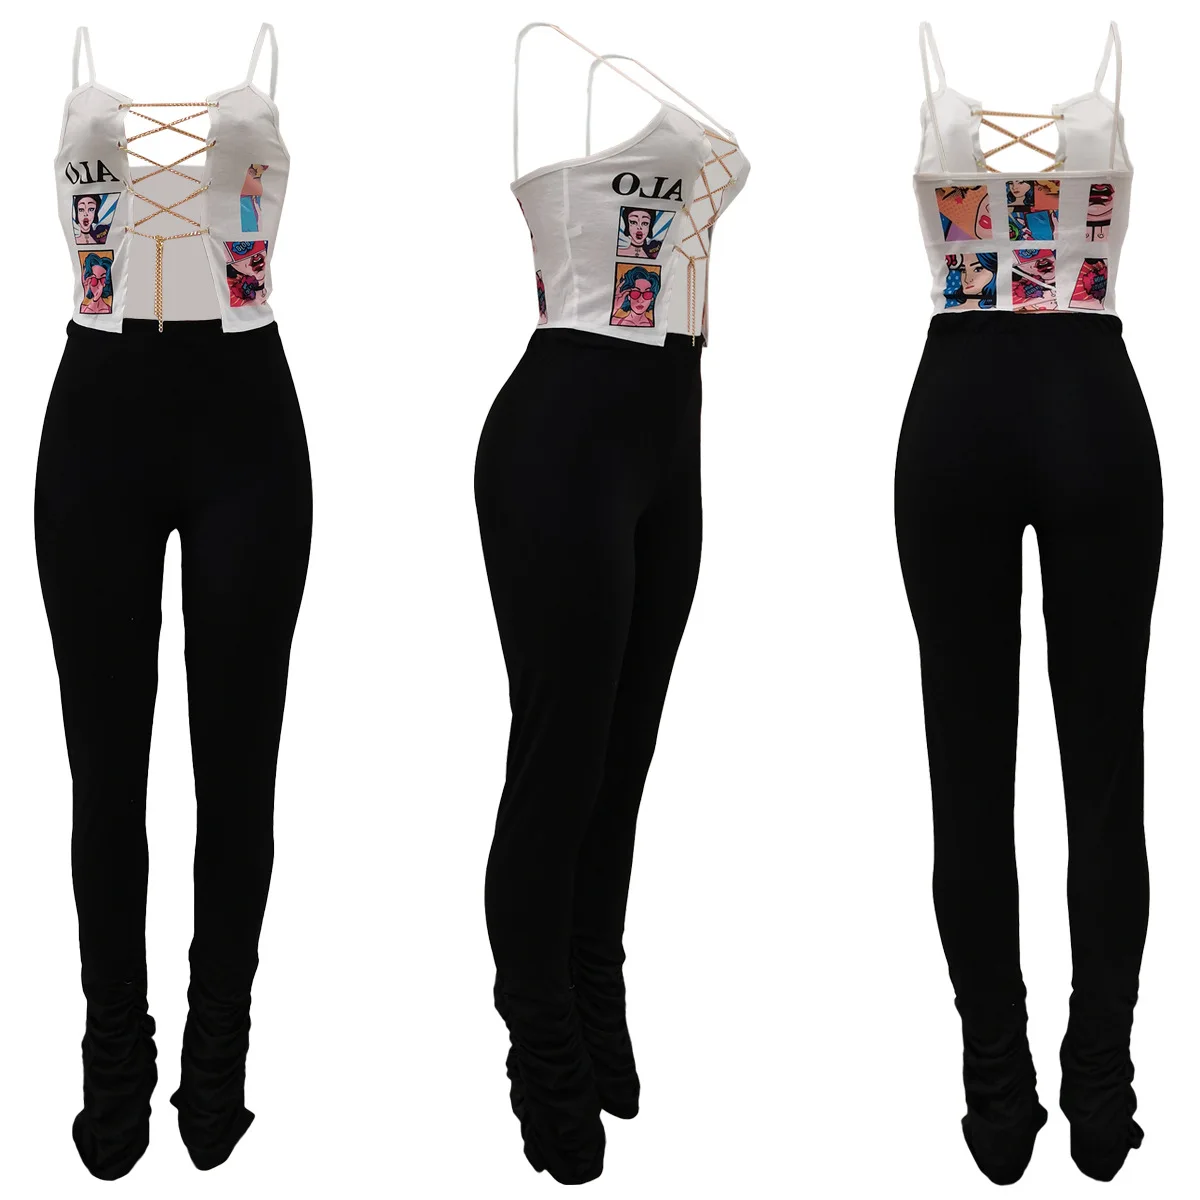 Women's Chain Bondage Lace Up Crop Tops With Stacked Pants Women's Two PIece Sets outfits women two pieces sets